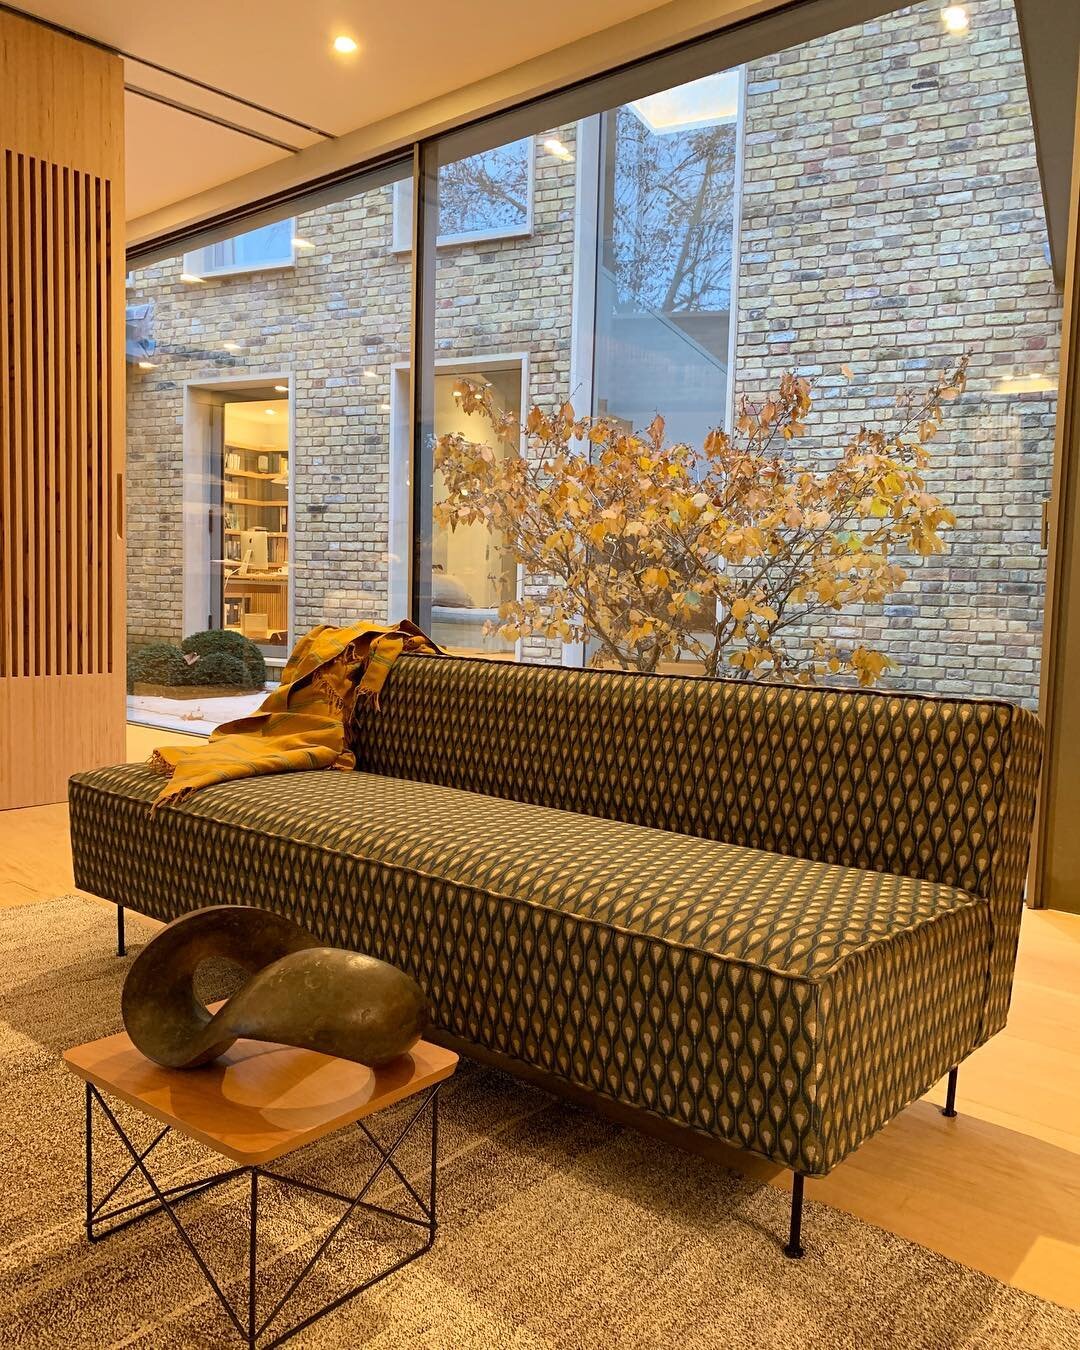 Last of these golden autumn days. We loved using the Gubi Modern Line sofa in this woven fabric. The organic forms of this RIchard Fox sculpture soften its contemporary edge. #autumn #interiors  #interiordesign #interiordesigner #sculpture #art #sofa